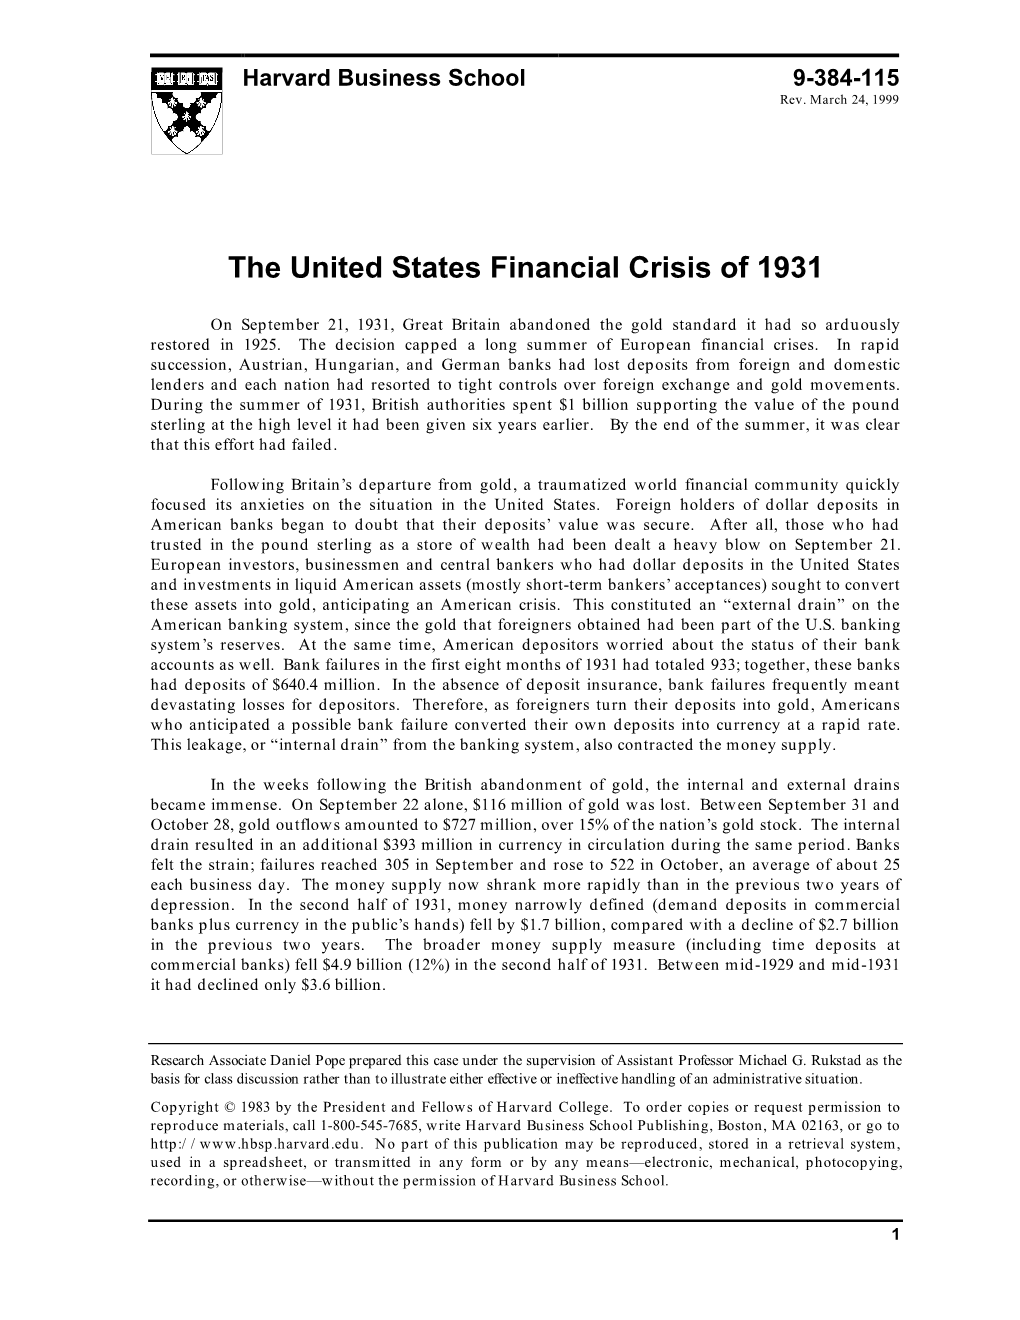 The United States Financial Crisis of 1931